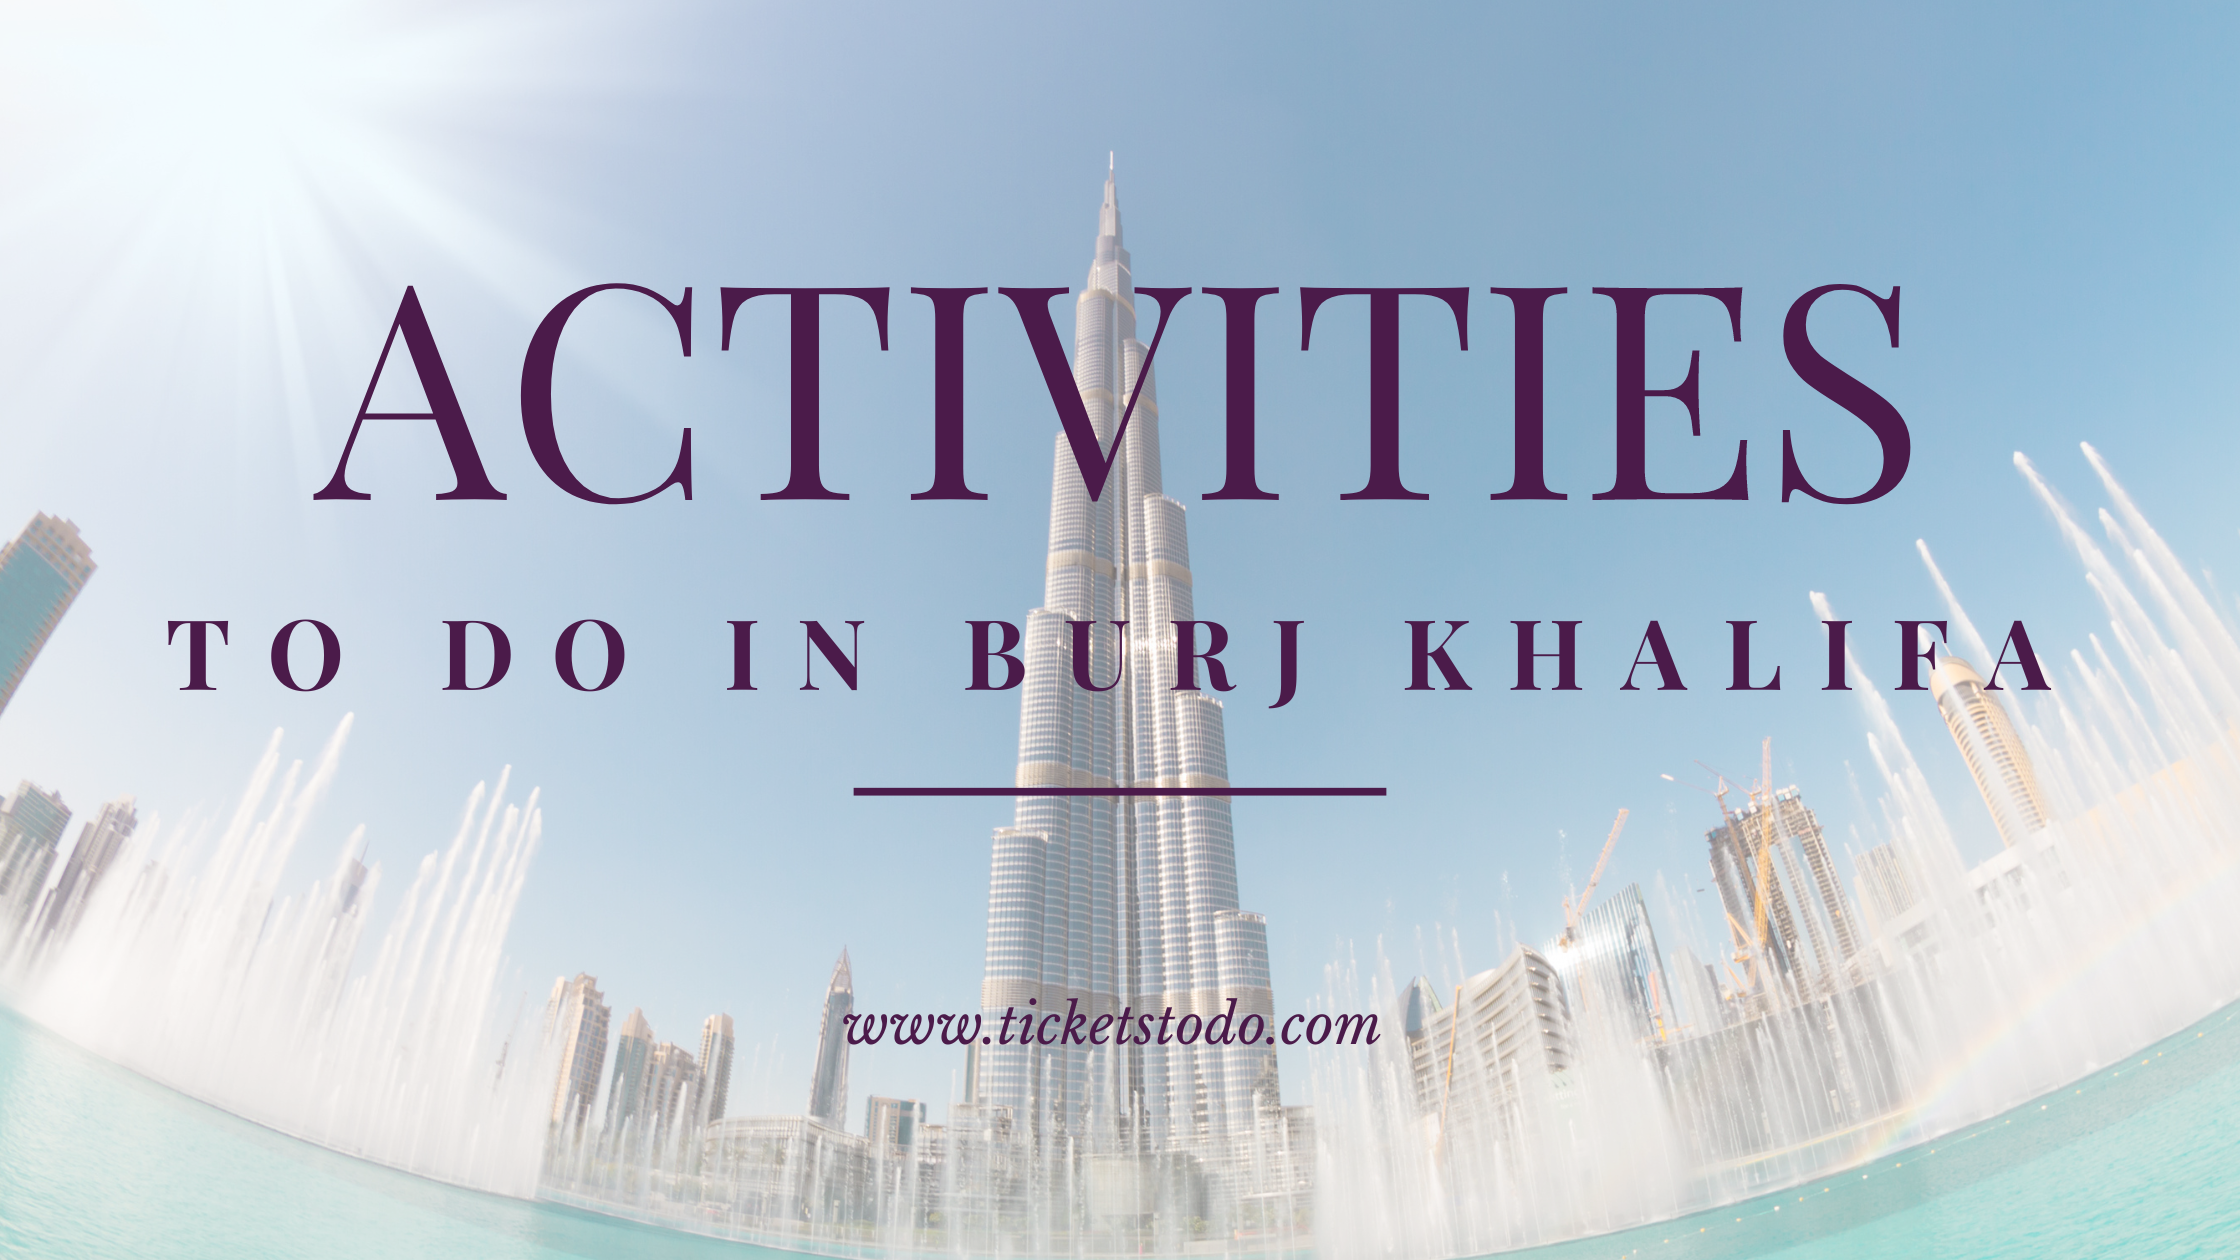 Activities To Do in Burj Khalifa: How To Spend A Spectacular Day &#038; Night at The Burj Khalifa